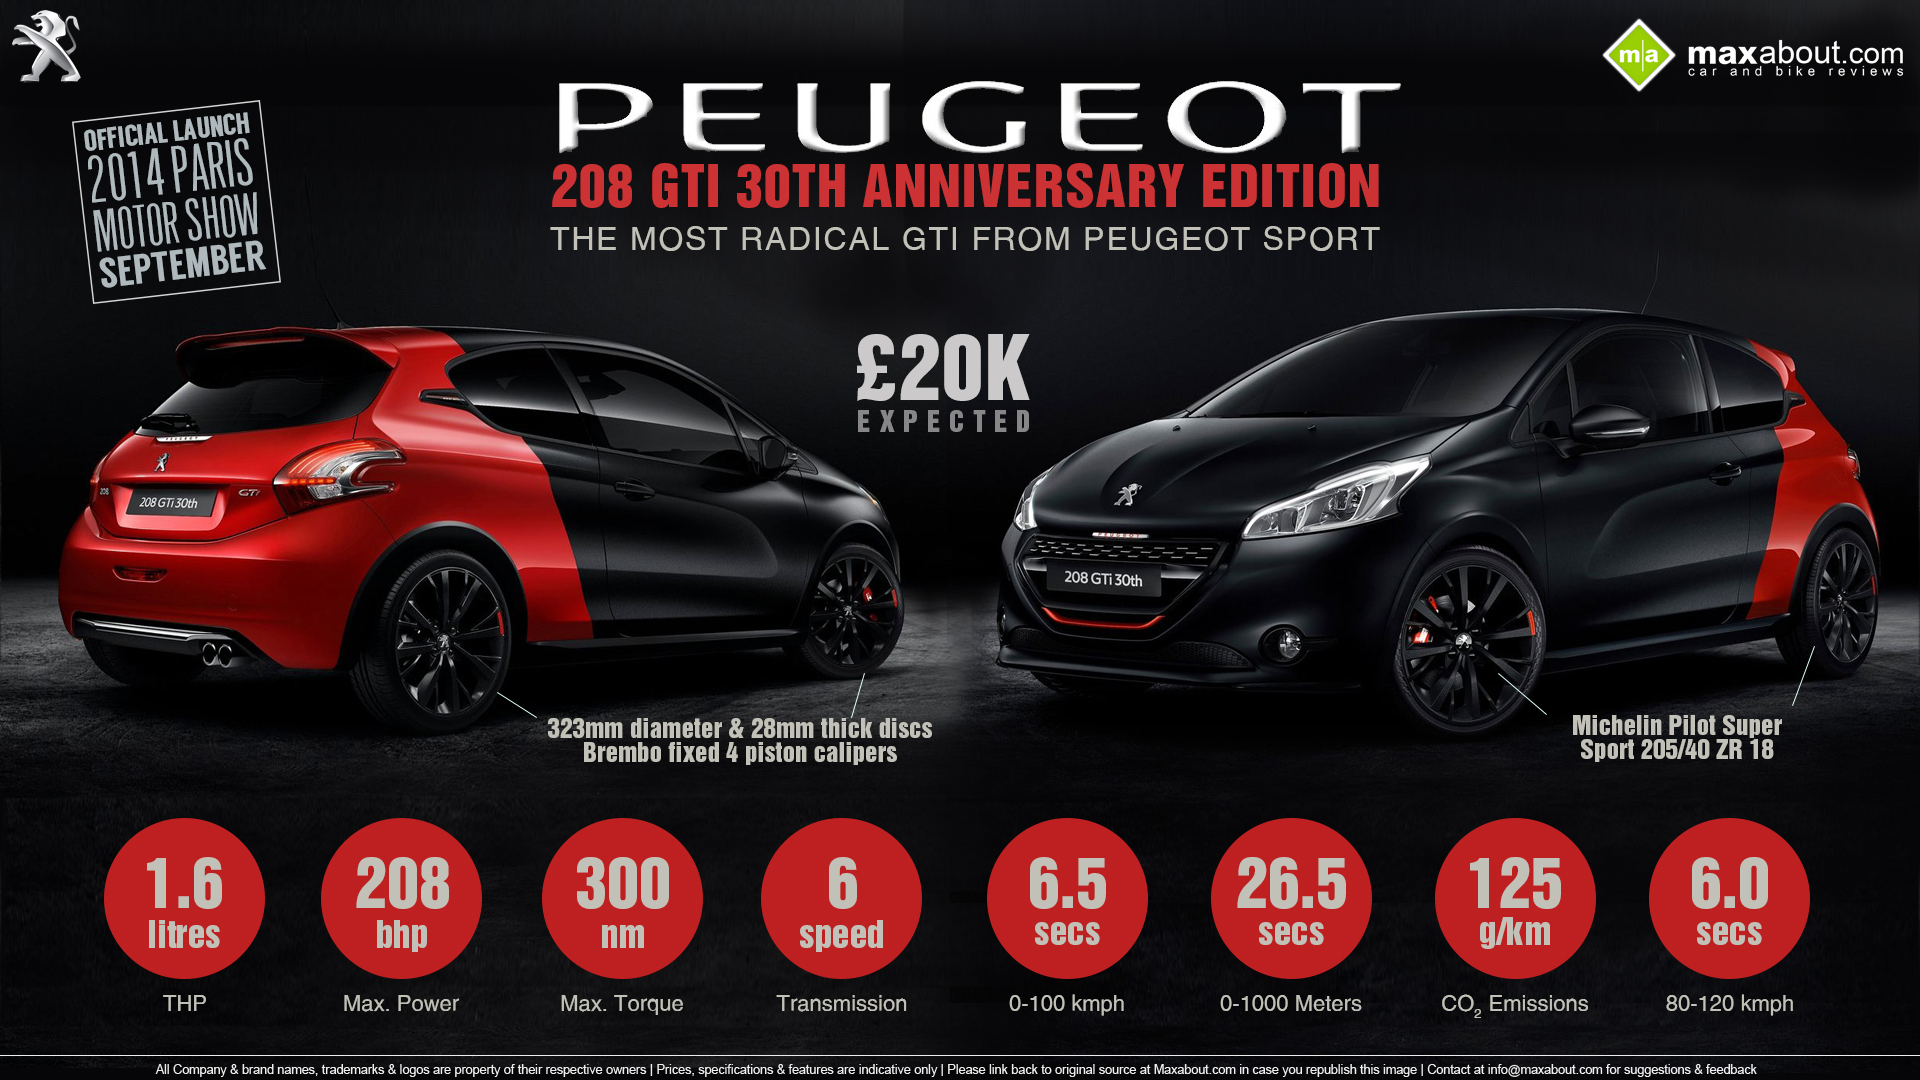 Peugeot 208 GTI 30th Anniversary Edition, motoring review: A